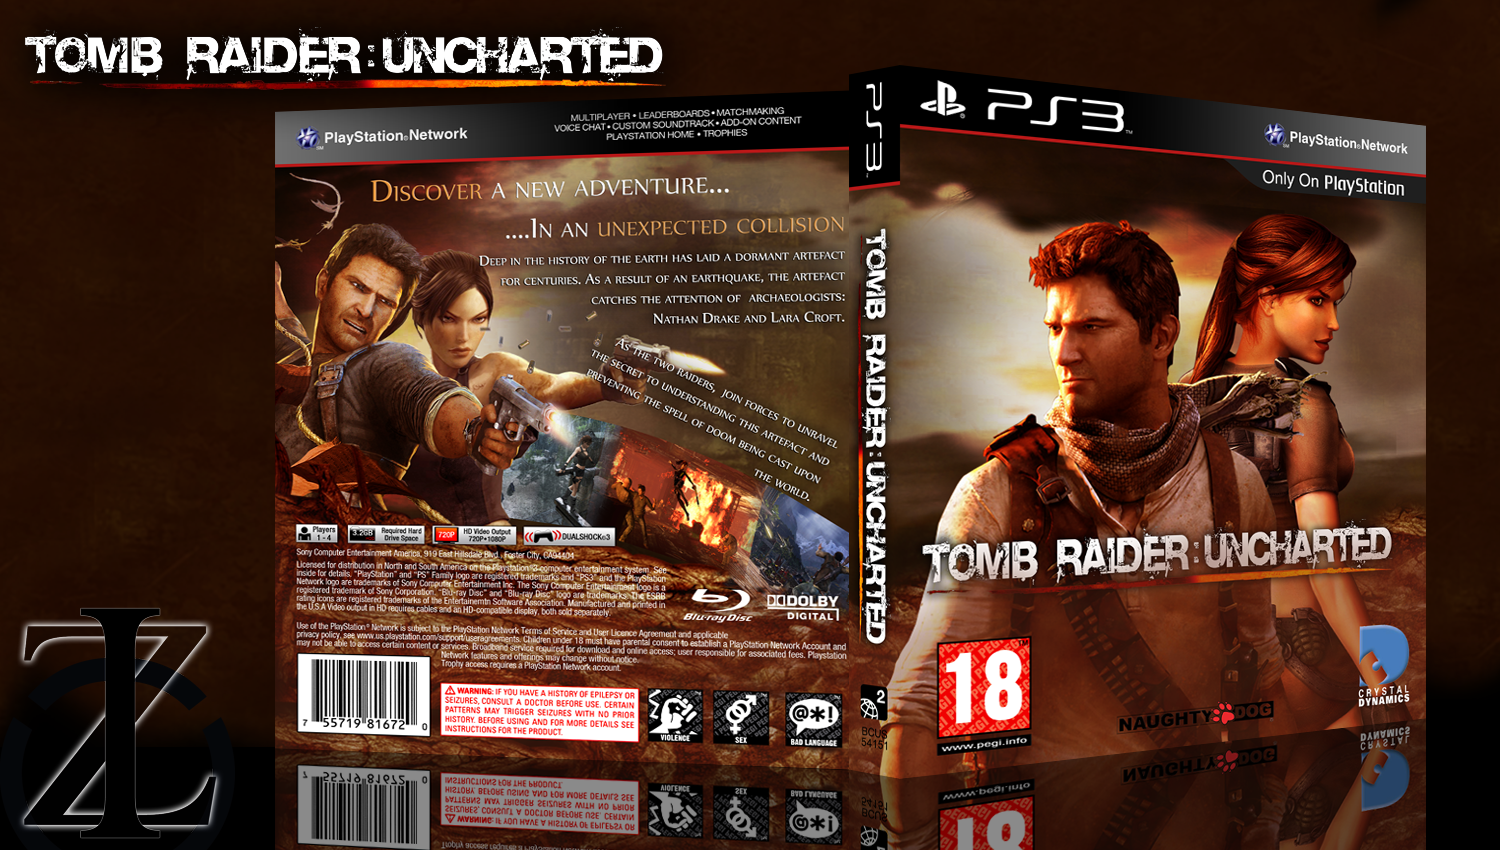 Tomb Raider:Uncharted box cover